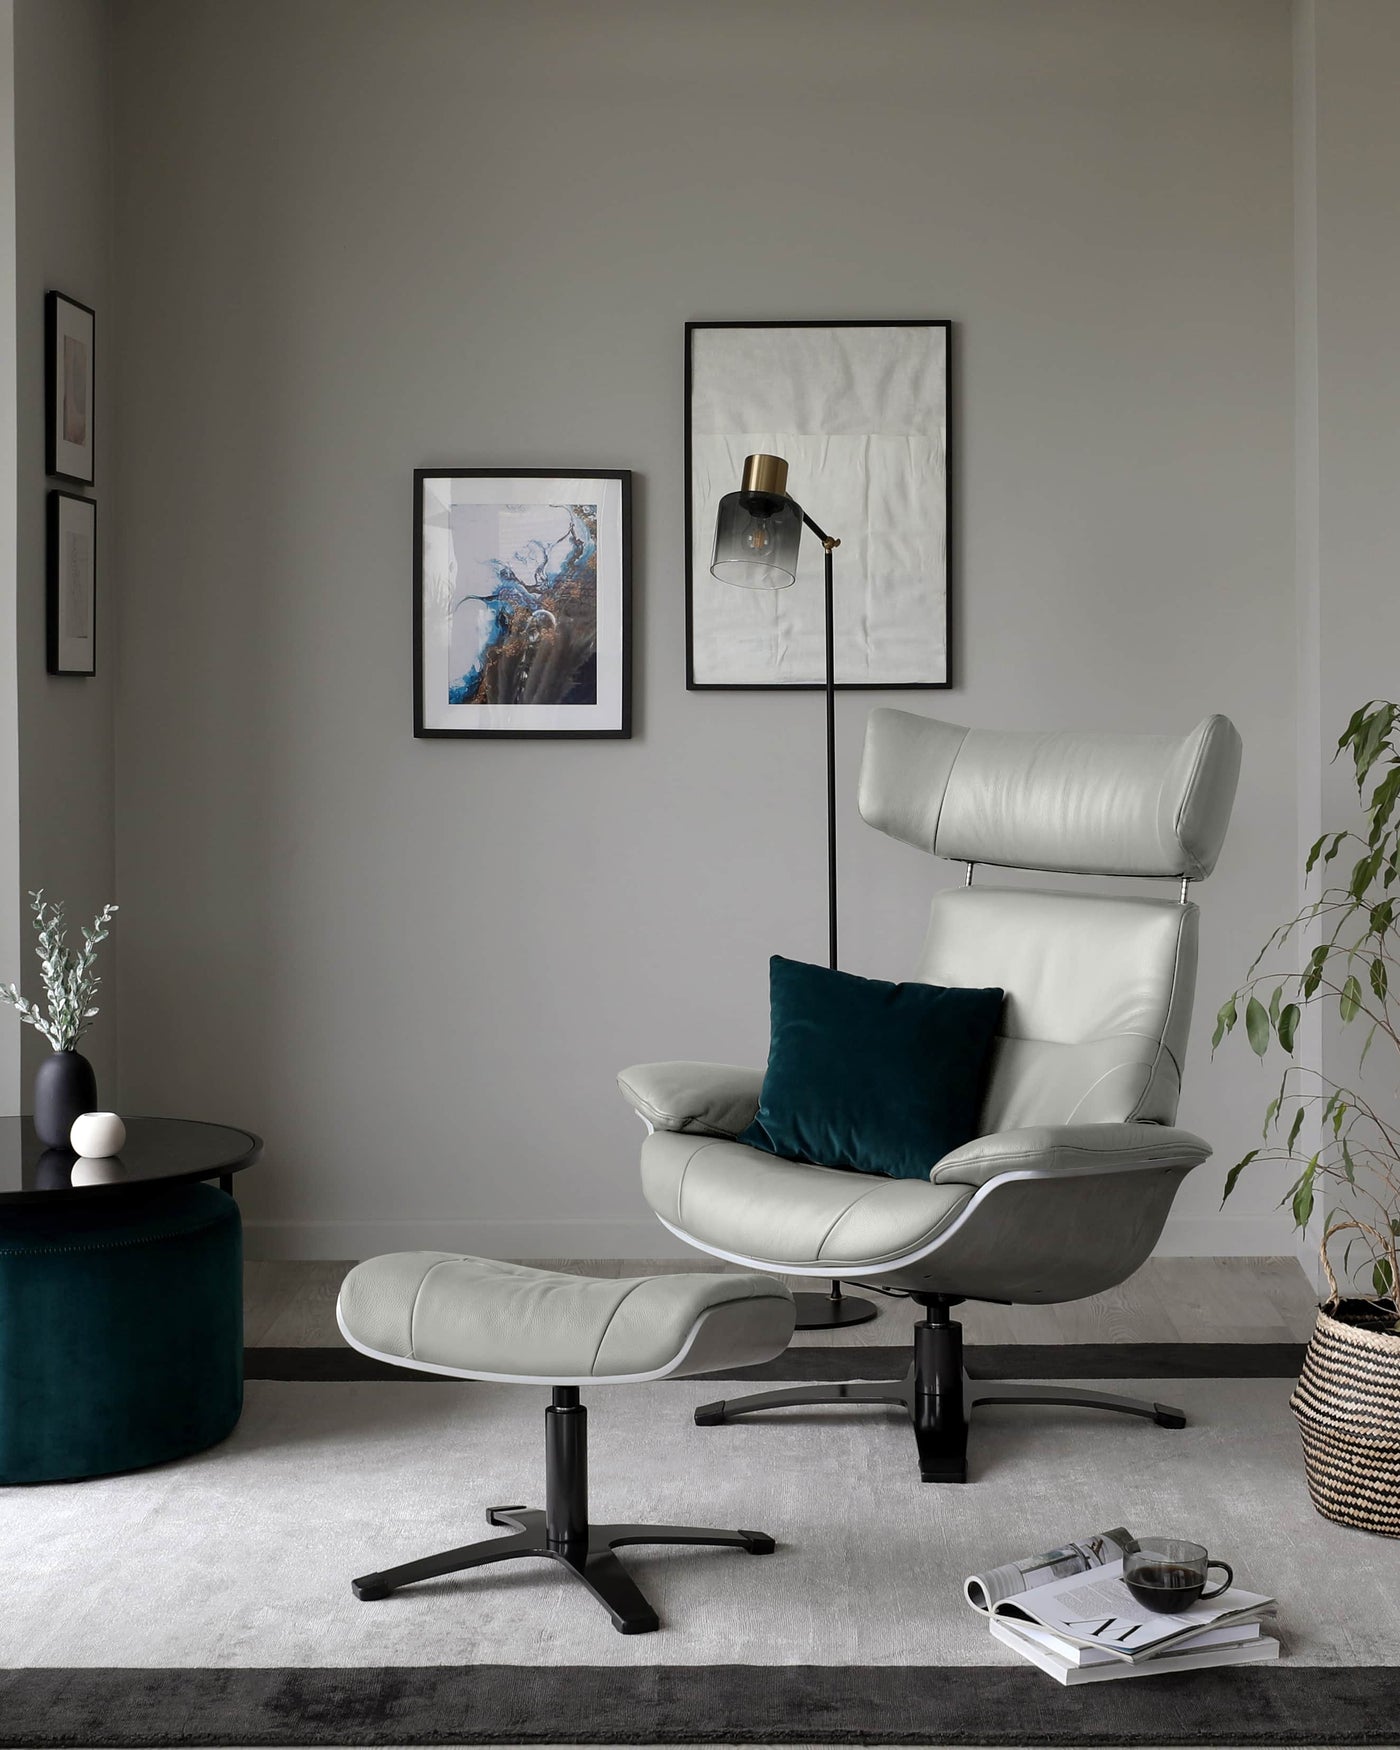 Elegant modern furniture set in a minimalist living room, including a light grey leather recliner chair with a matching footstool, both featuring sleek black metal bases. A round, dark blue velvet ottoman sits beside a matte black coffee table with a white vase and greenery. The room is decorated with framed artwork, a floor lamp, and accent cushions.